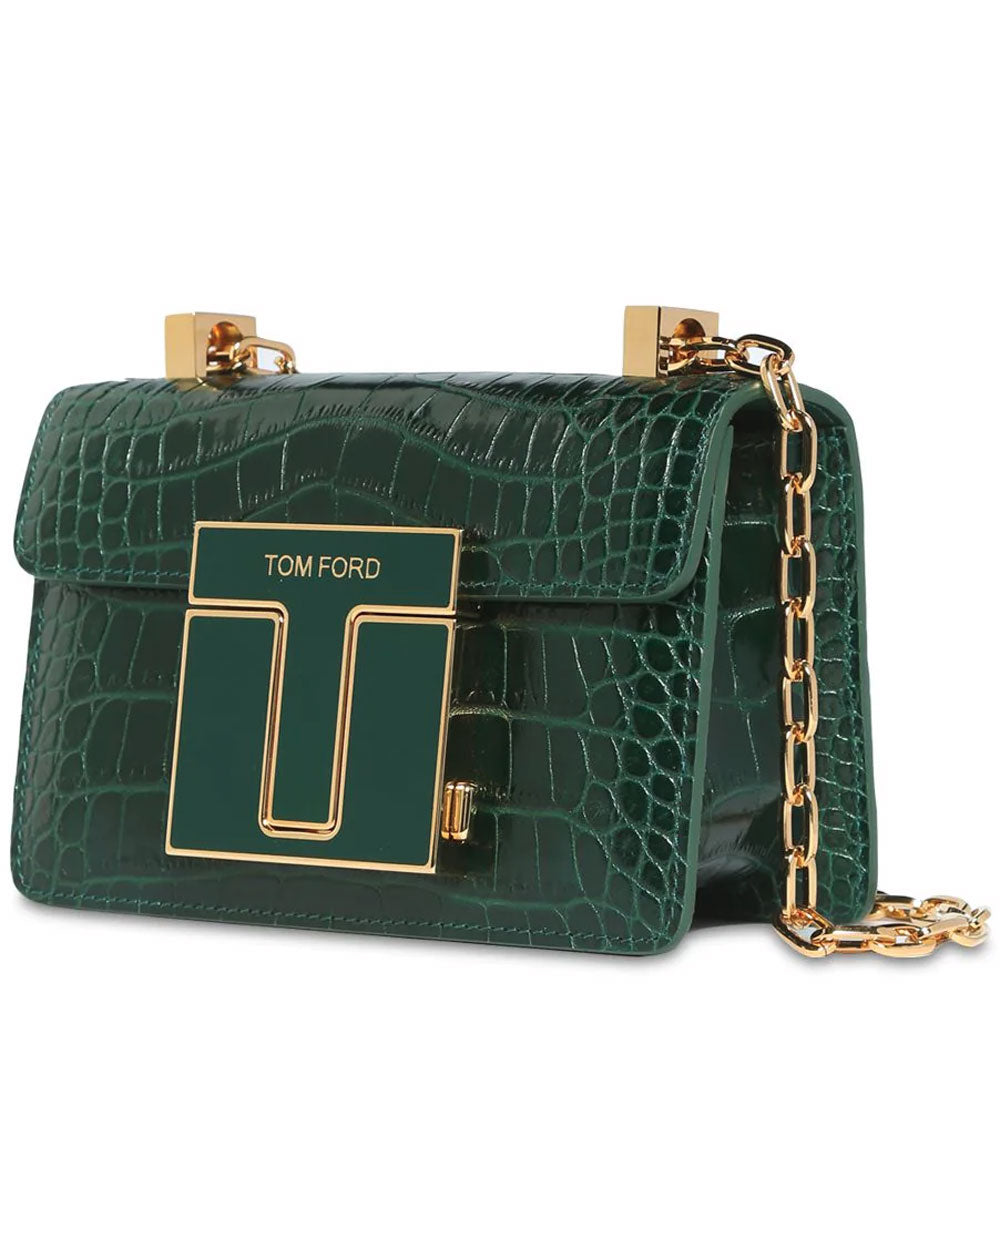 Tom Ford Bag Best Price In Pakistan, Rs 15500